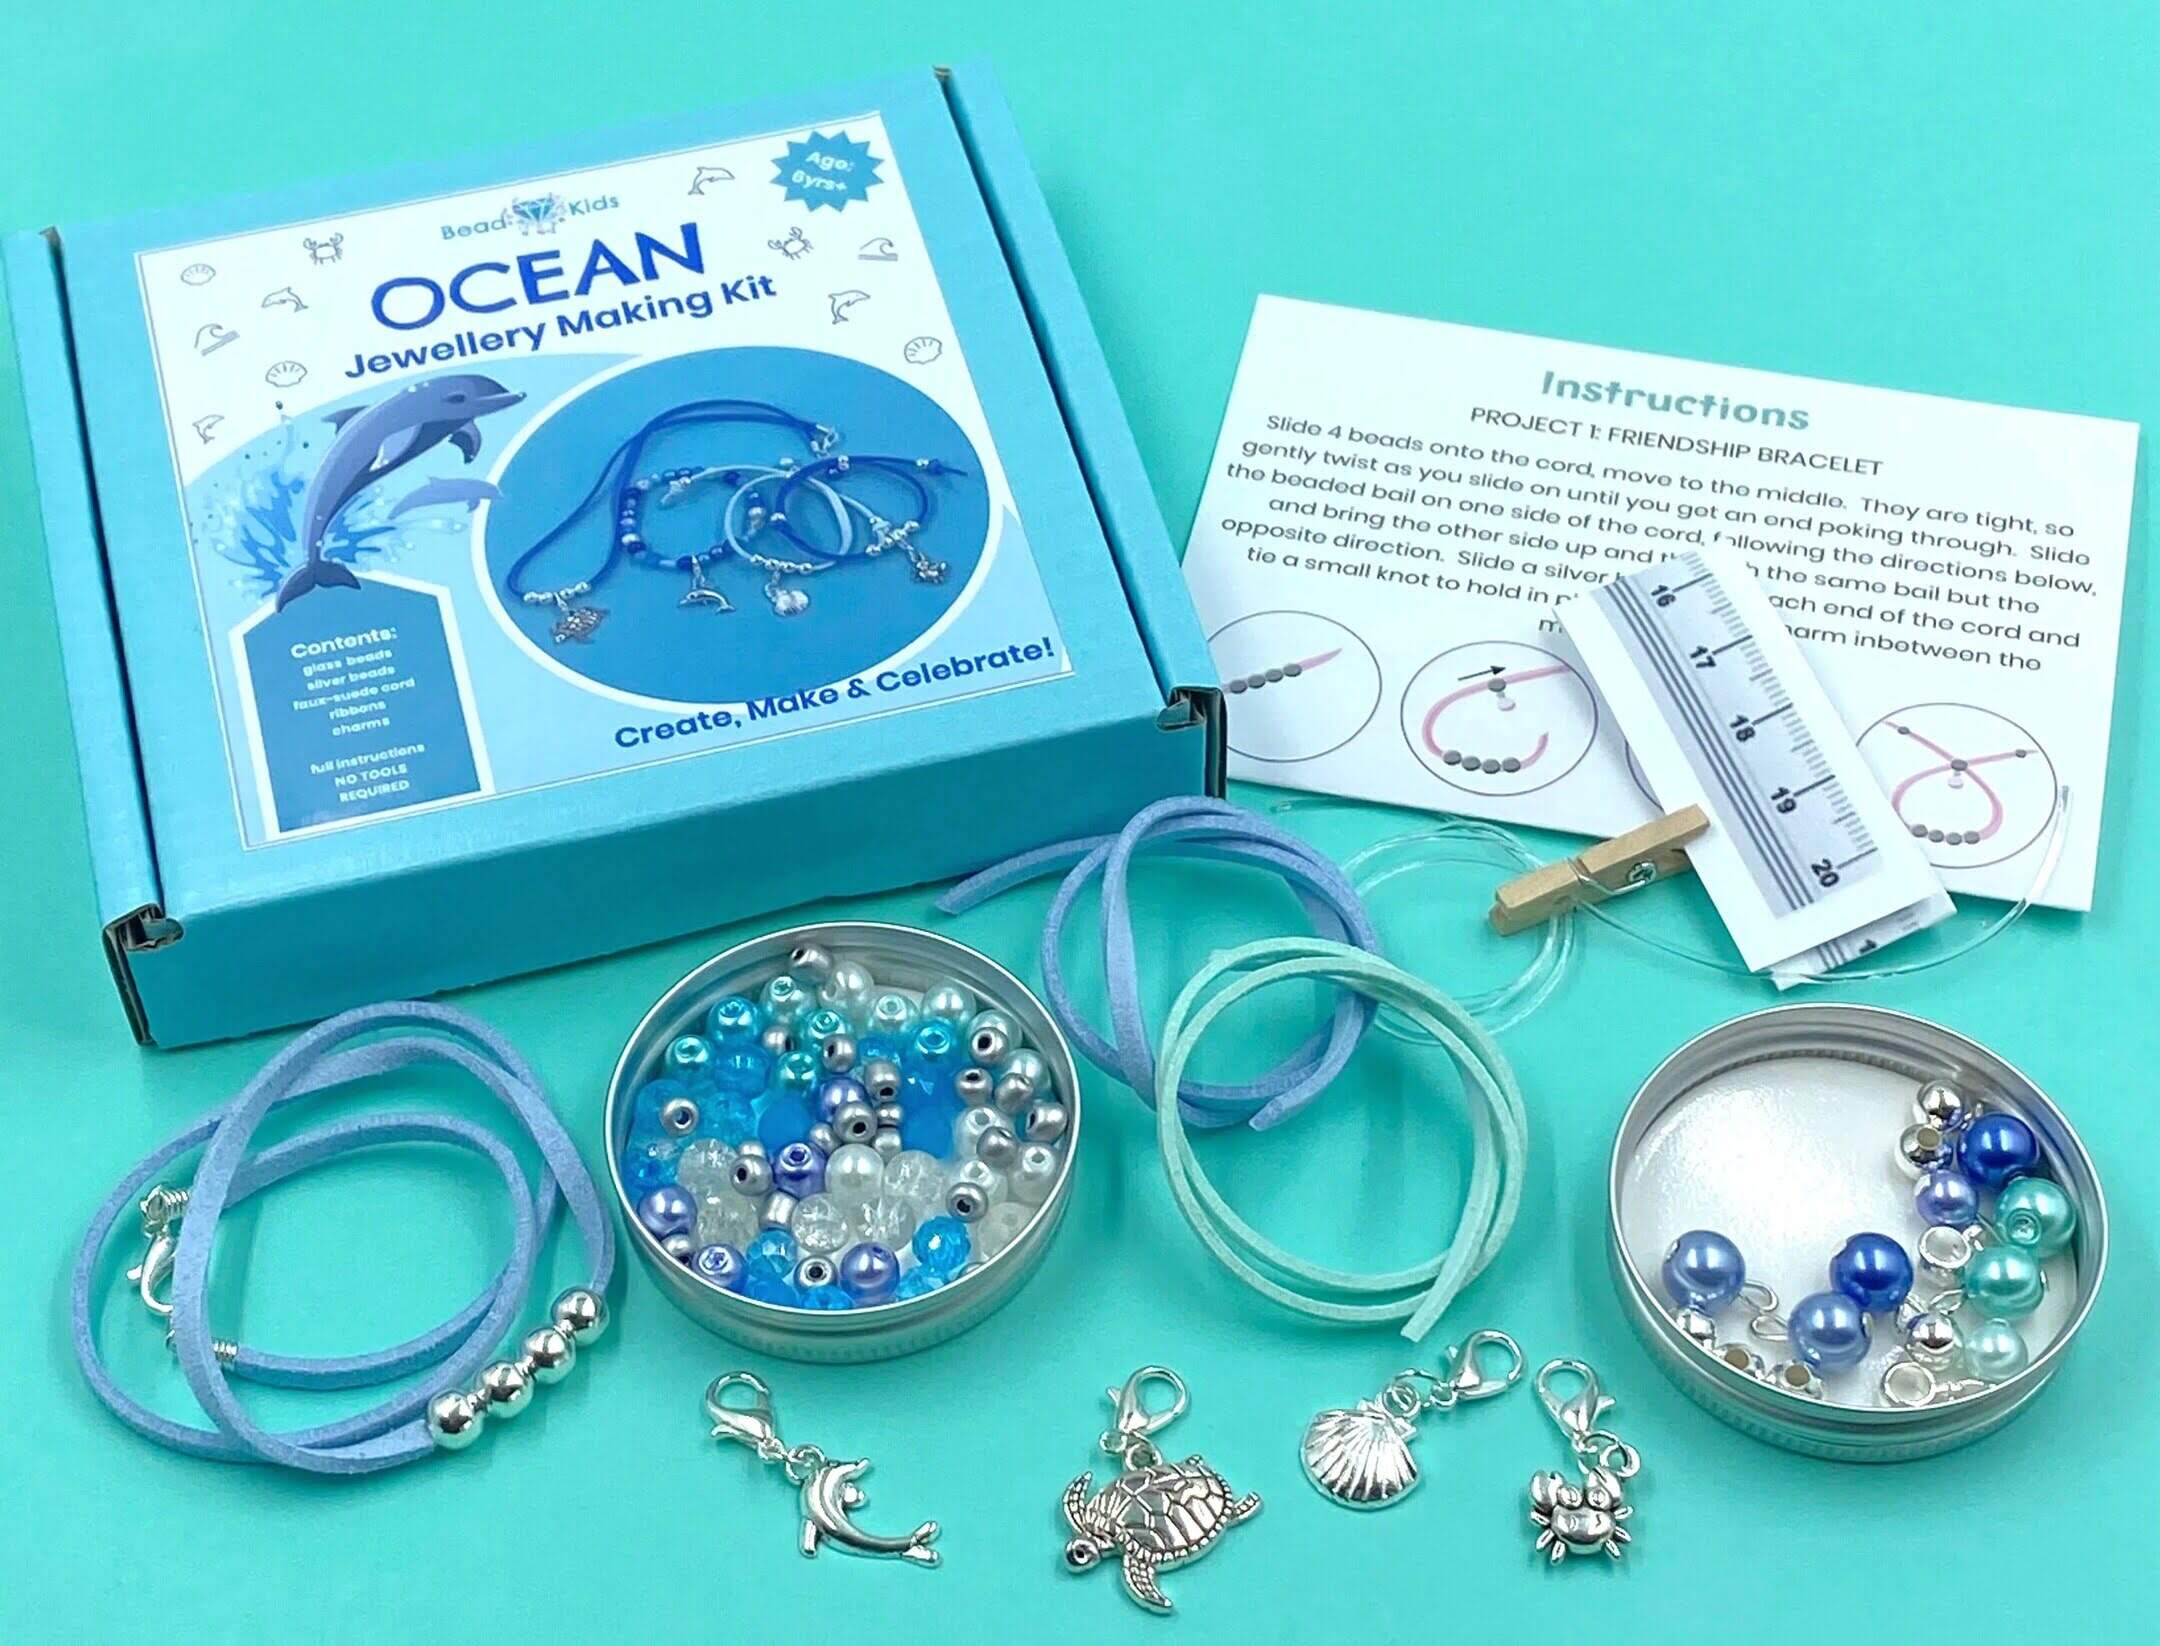 Review: Jewelry Making Kit - A Comprehensive Analysis